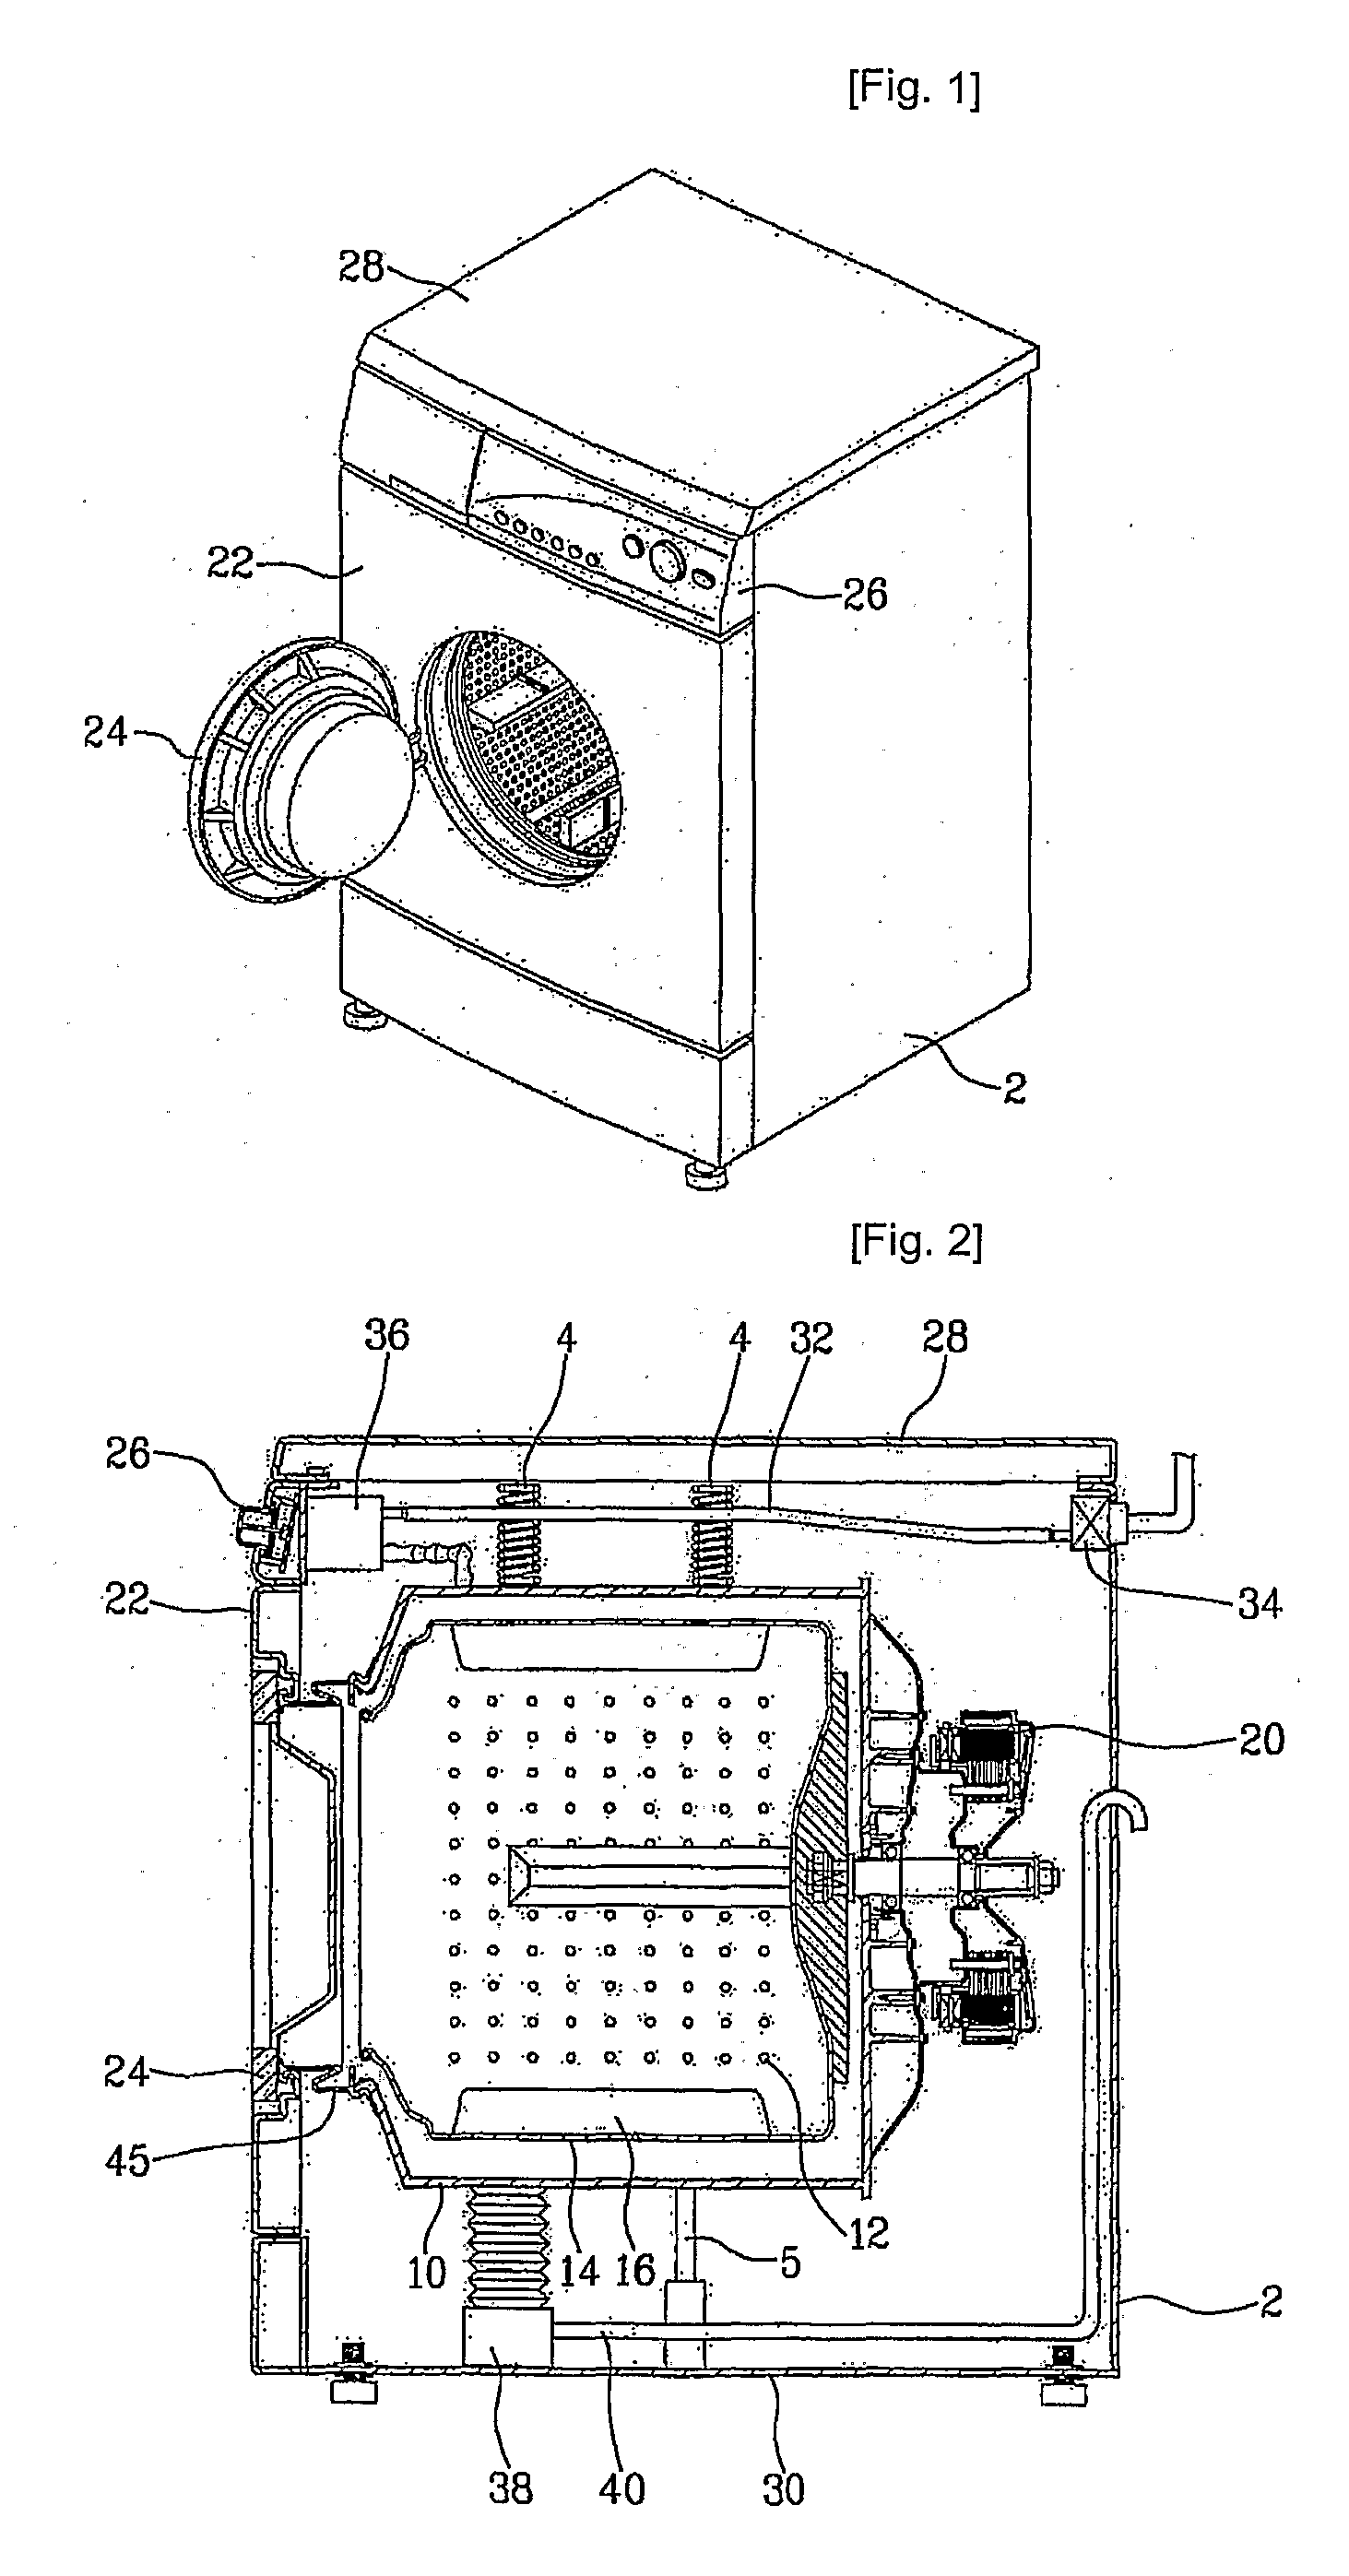 Apparatus of Supplying and Discharging Fluid and Method of Operating the Same